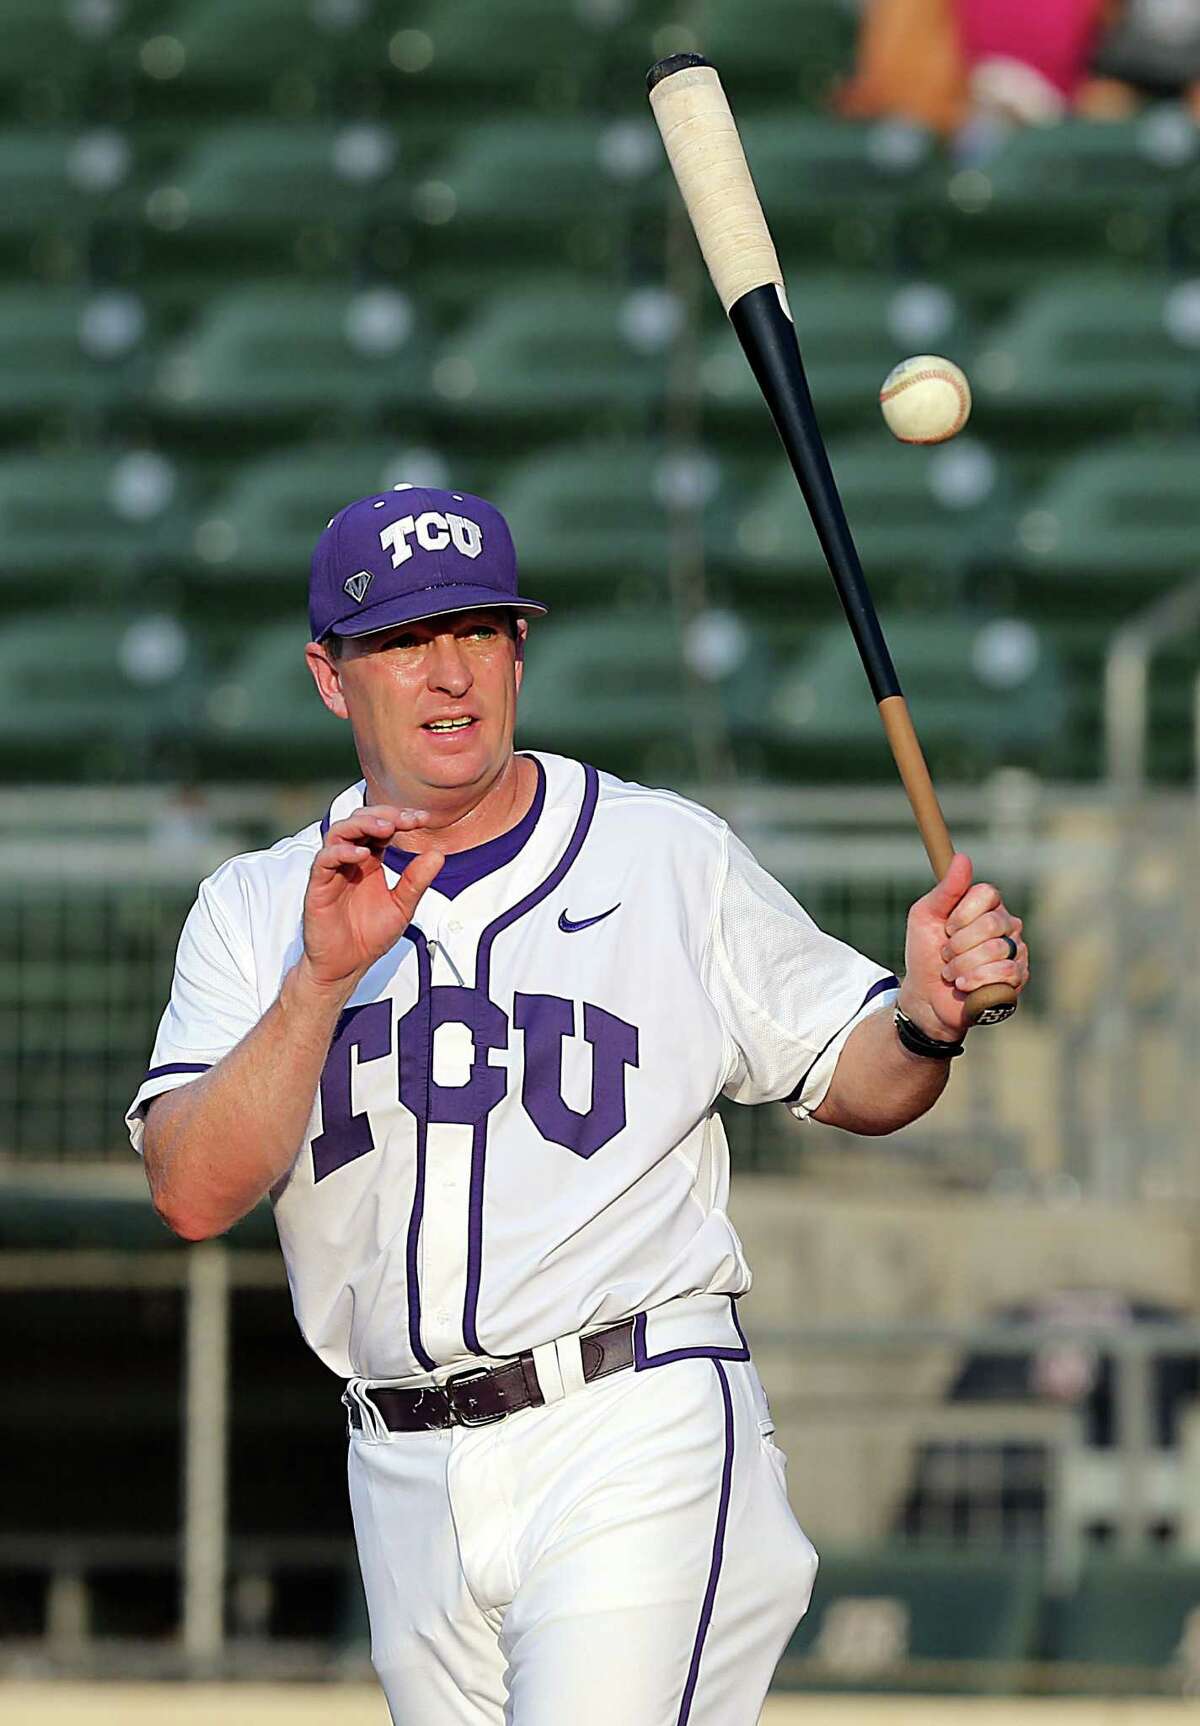 TCU head coach Jim Schlossnagle takes infield practice with his team before the start of a NCAA college baseball super regional tournament game against Texas A&M on June 11, 2016, in College Station.